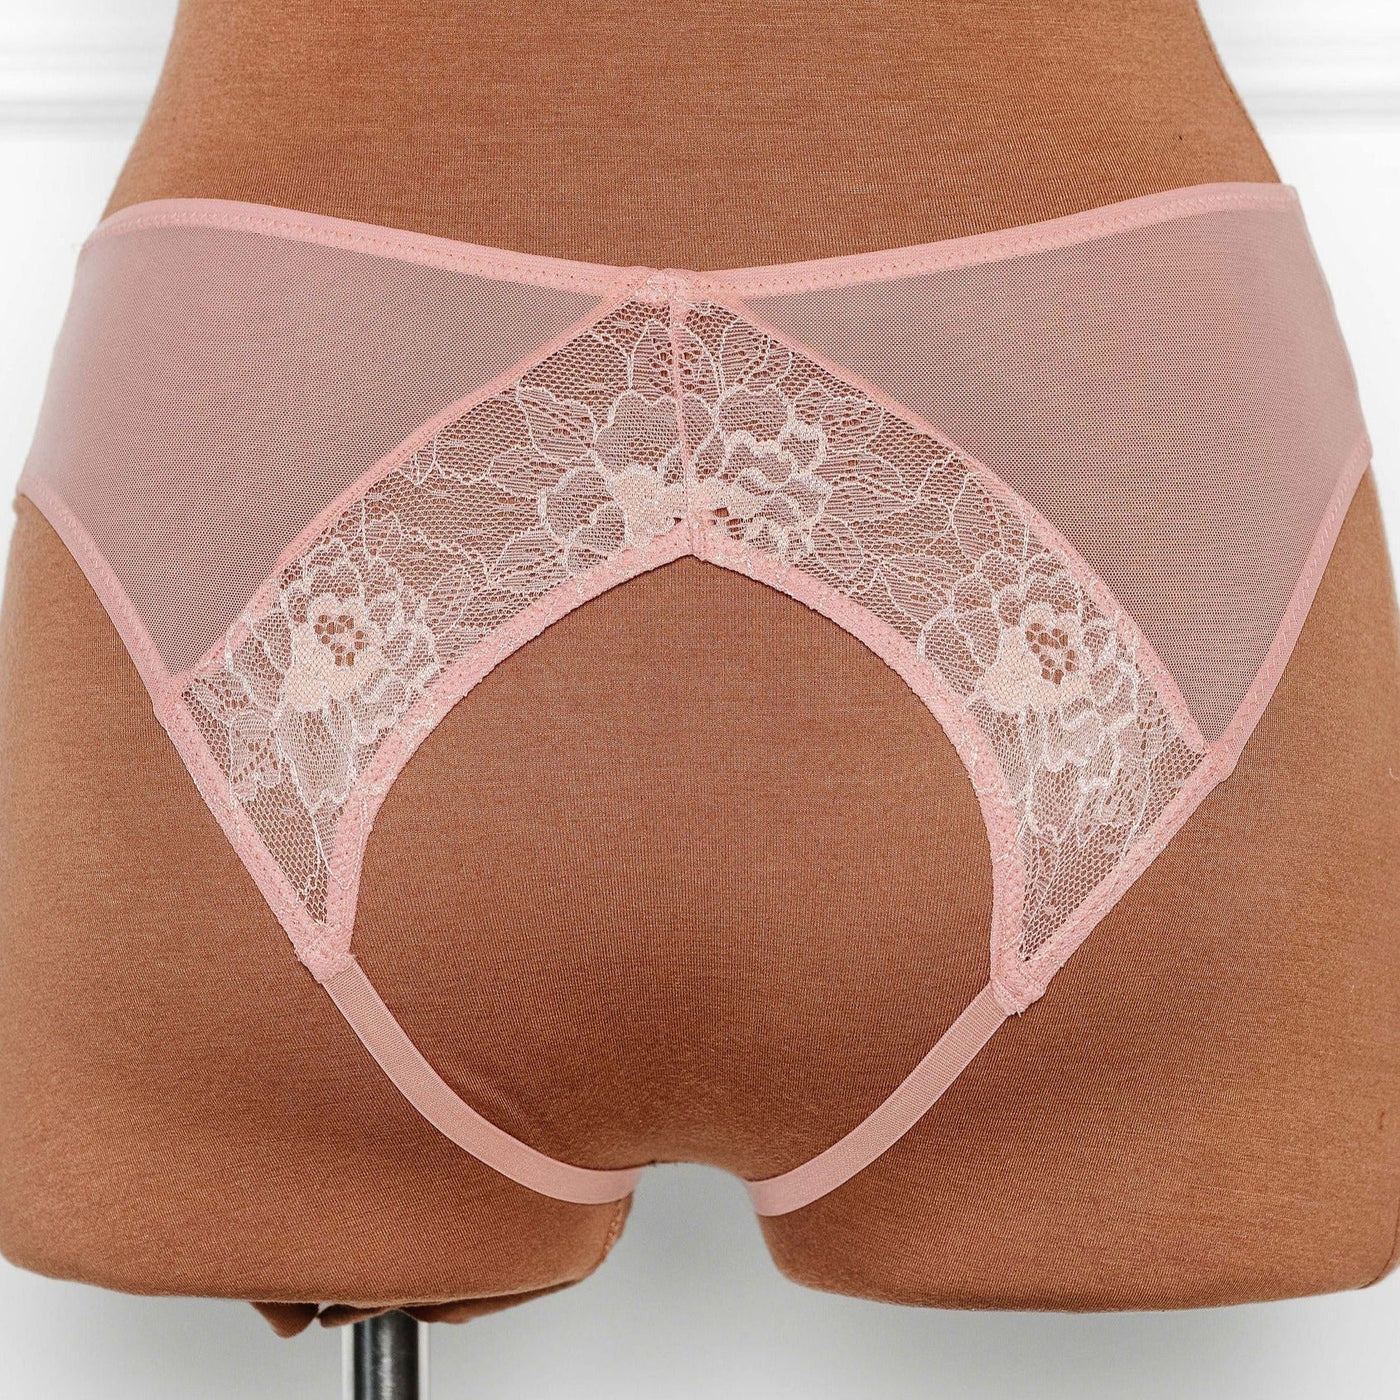 Lacy Crotchless Panty - Blush - Mentionables